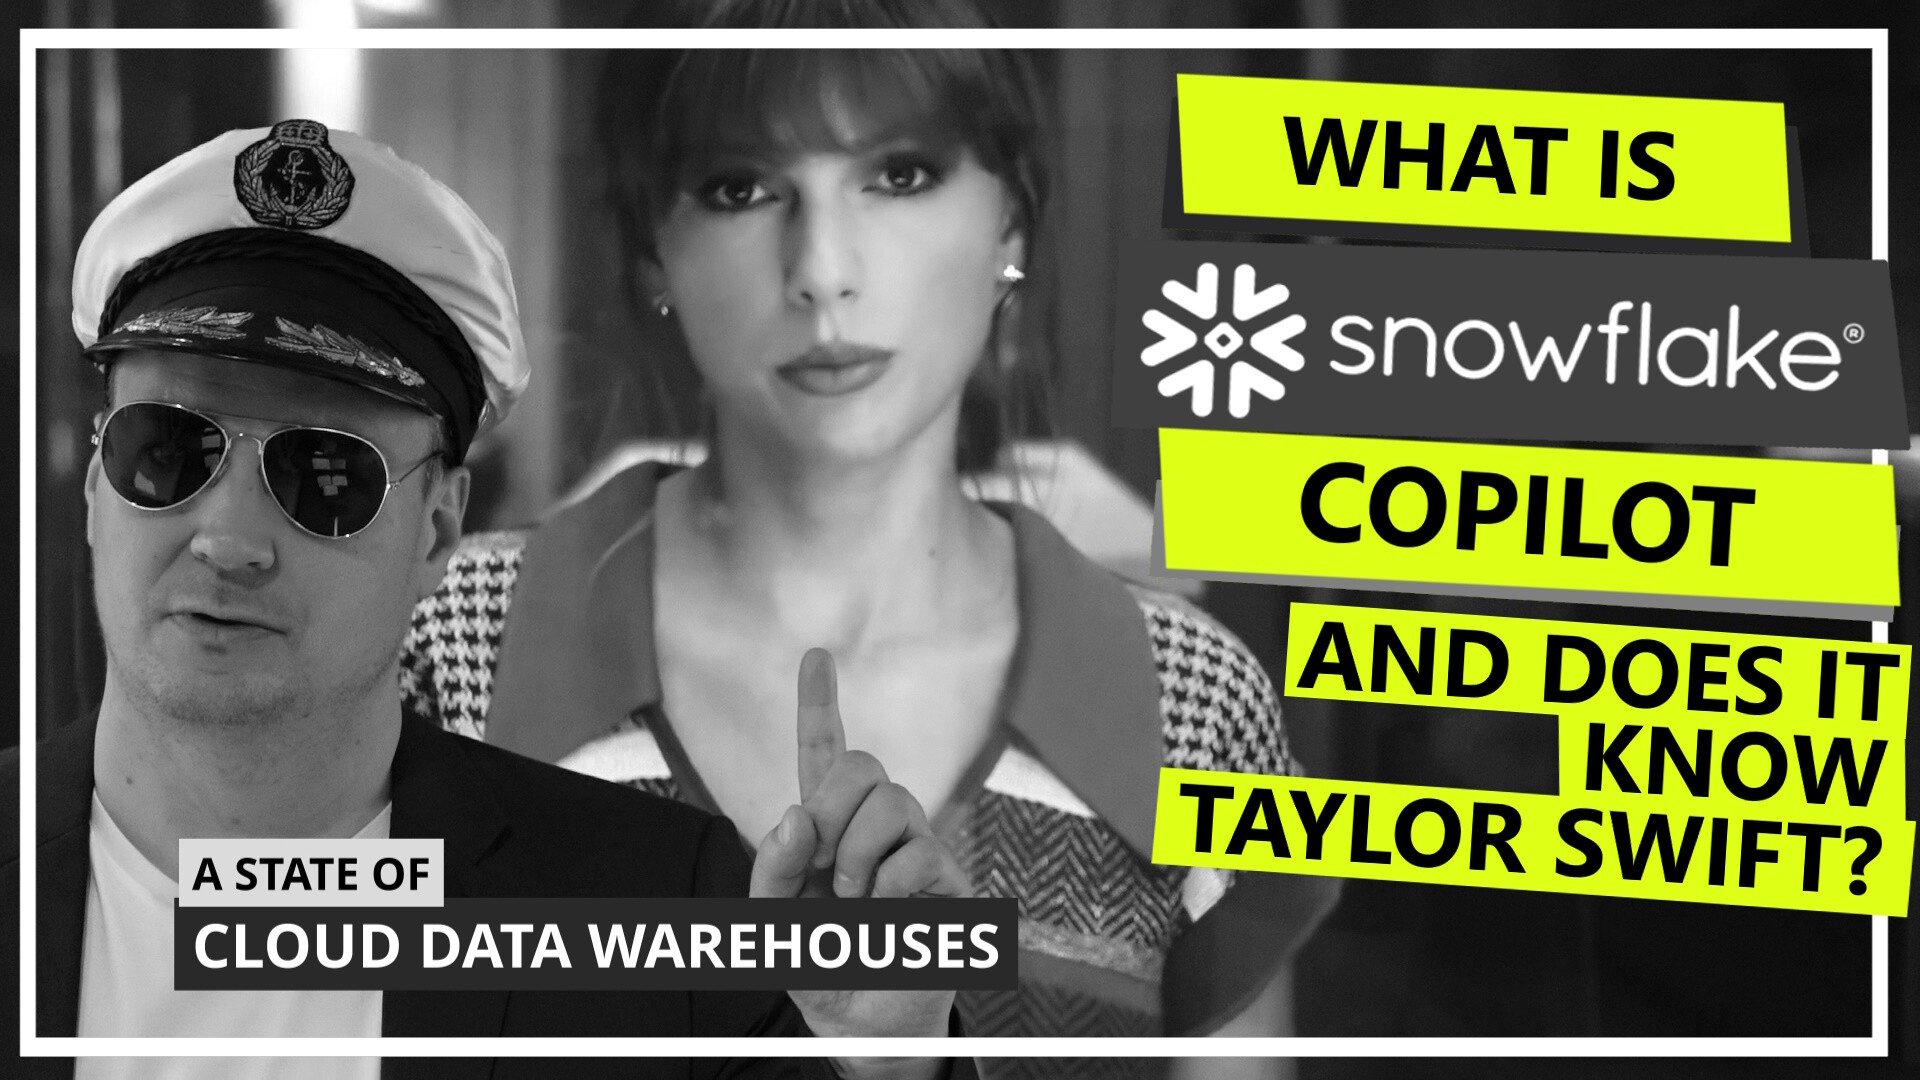 What is Snowflake Copilot and does it know Taylor Swift?